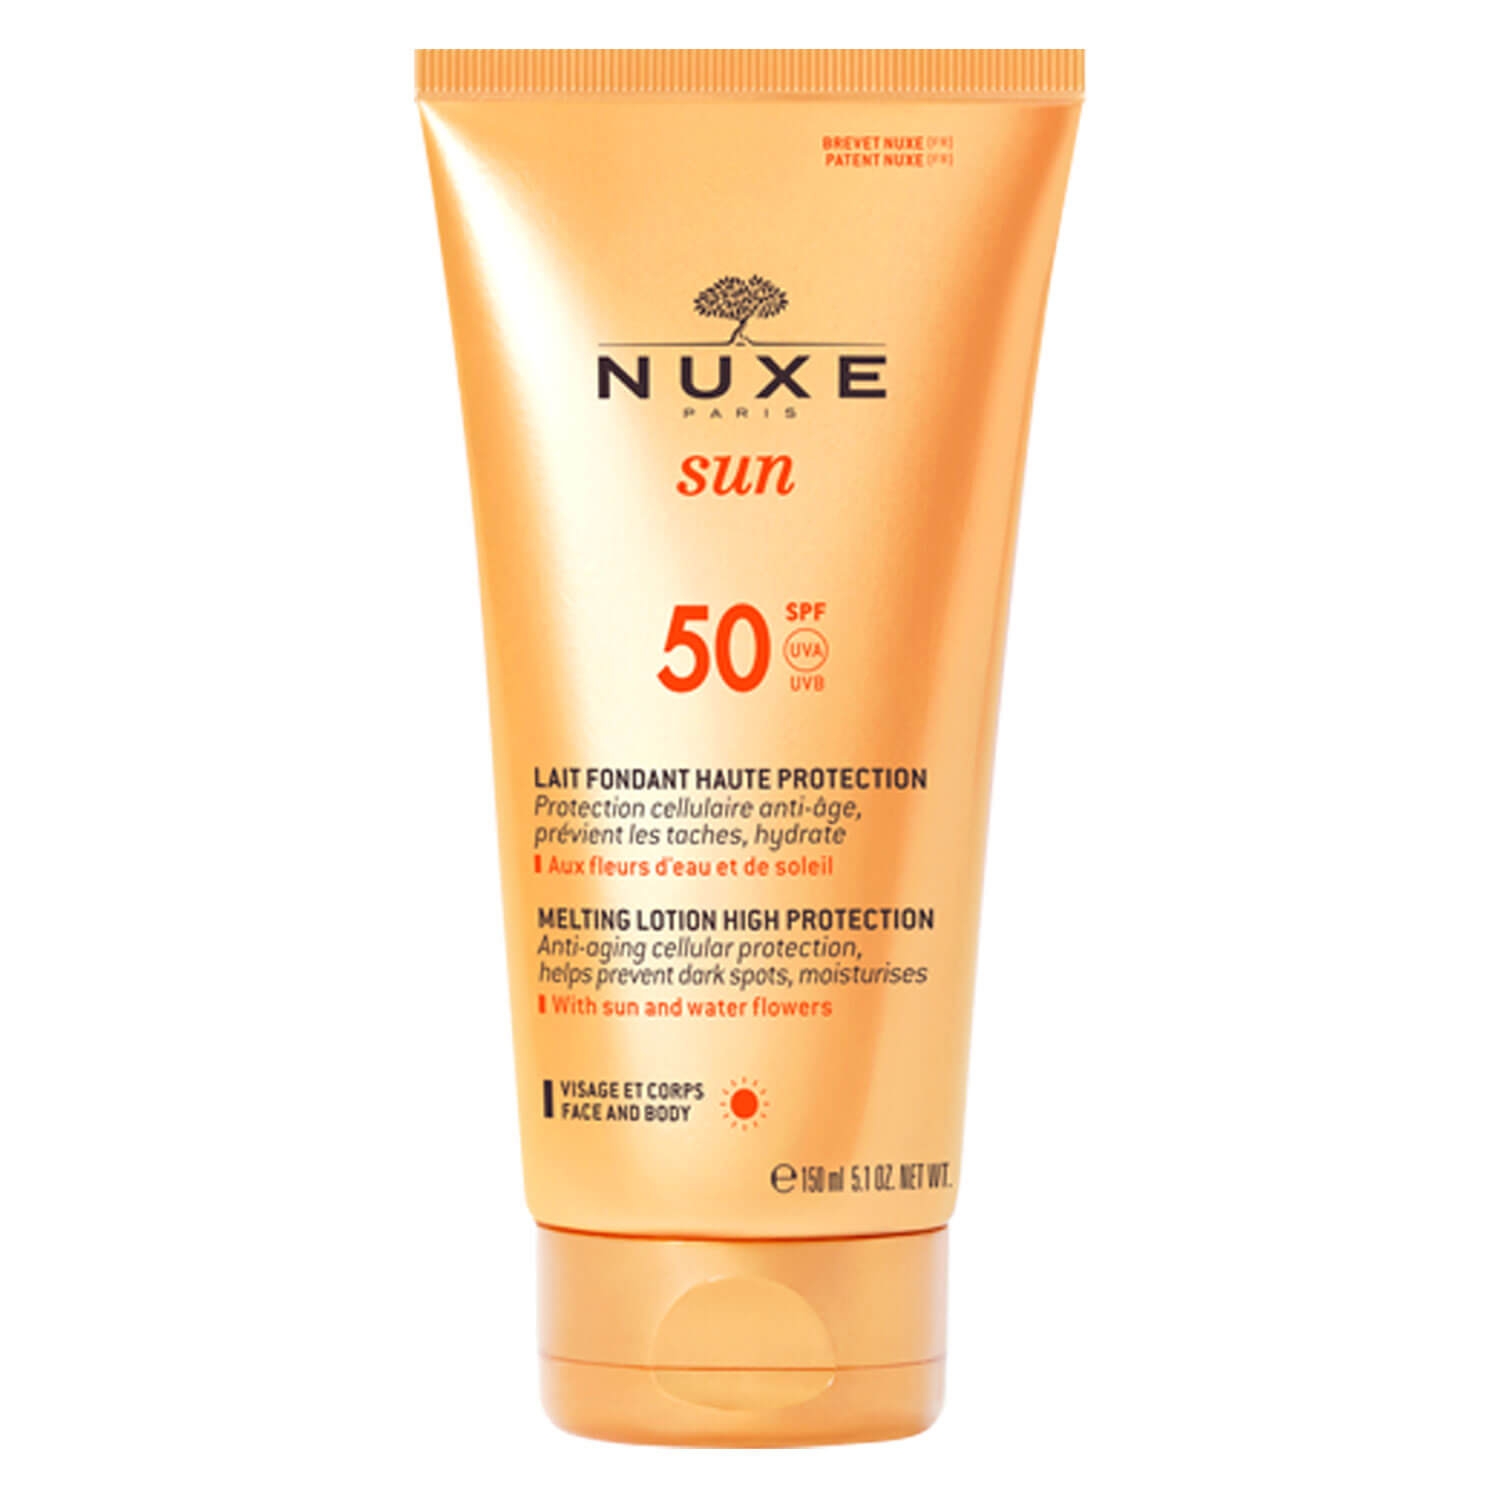 Product image from Nuxe Sun - Lait Fondant Haute Protection SPF50